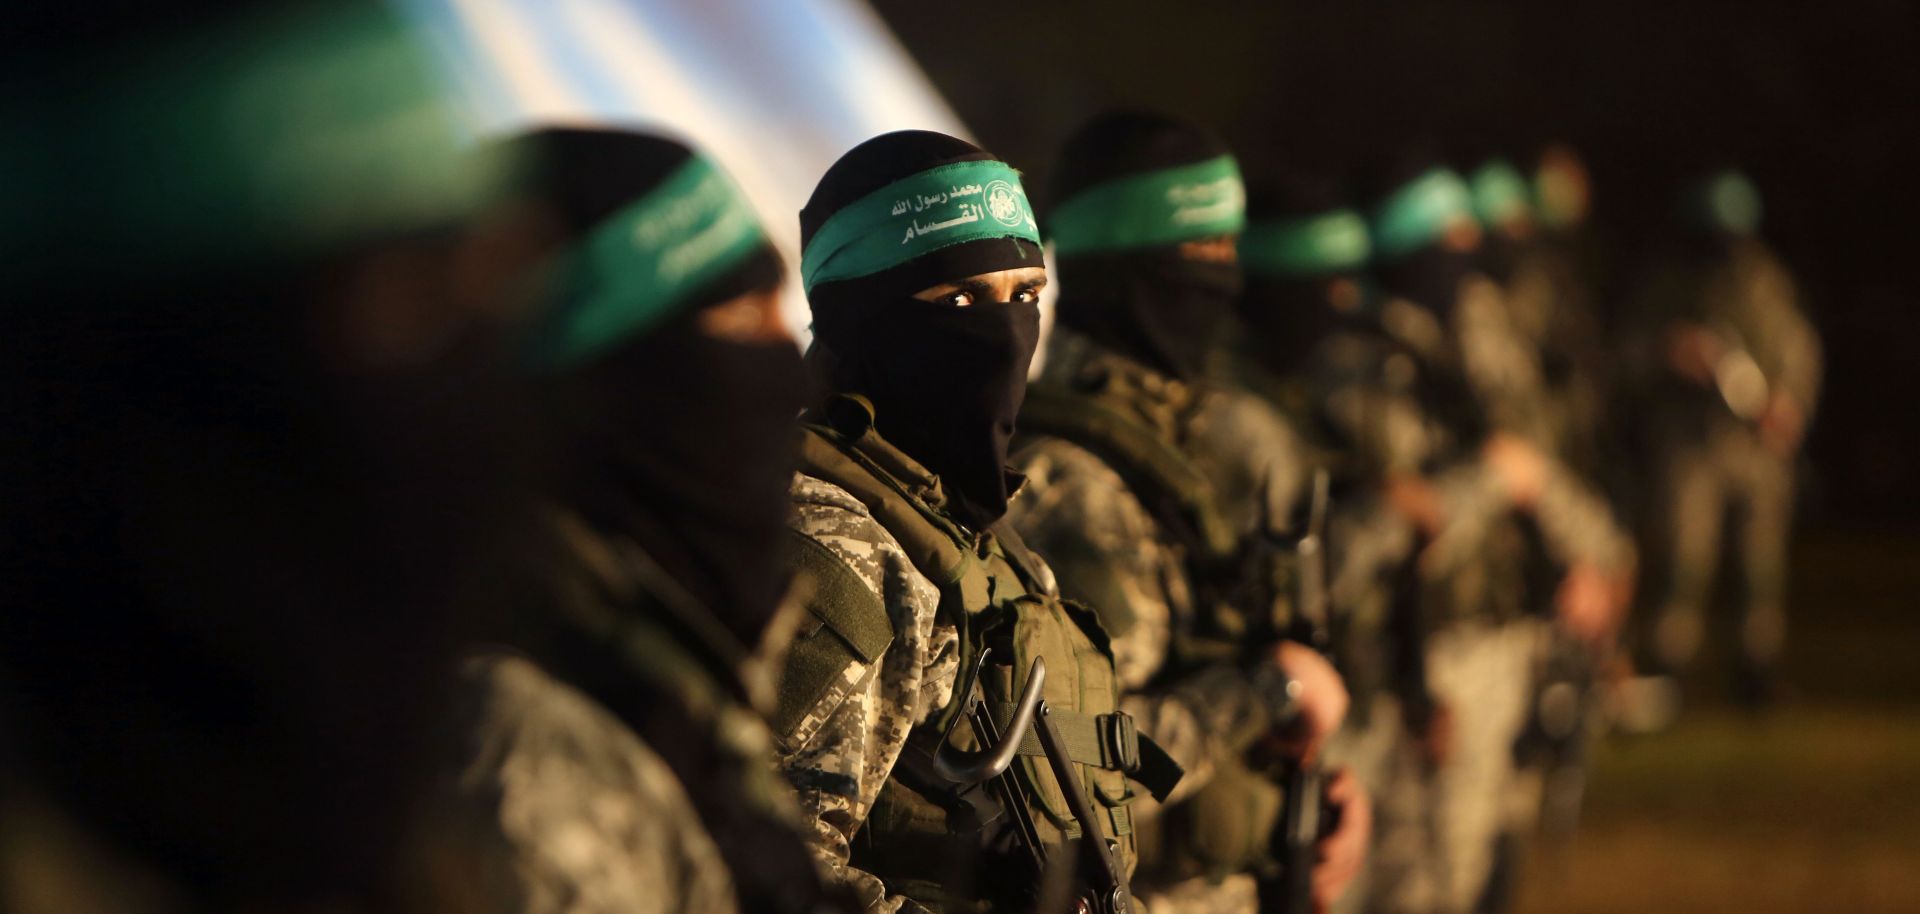 Palestinian members of the Ezzedine al-Qassam Brigades, the armed wing of the Hamas movement, take part in a gathering.